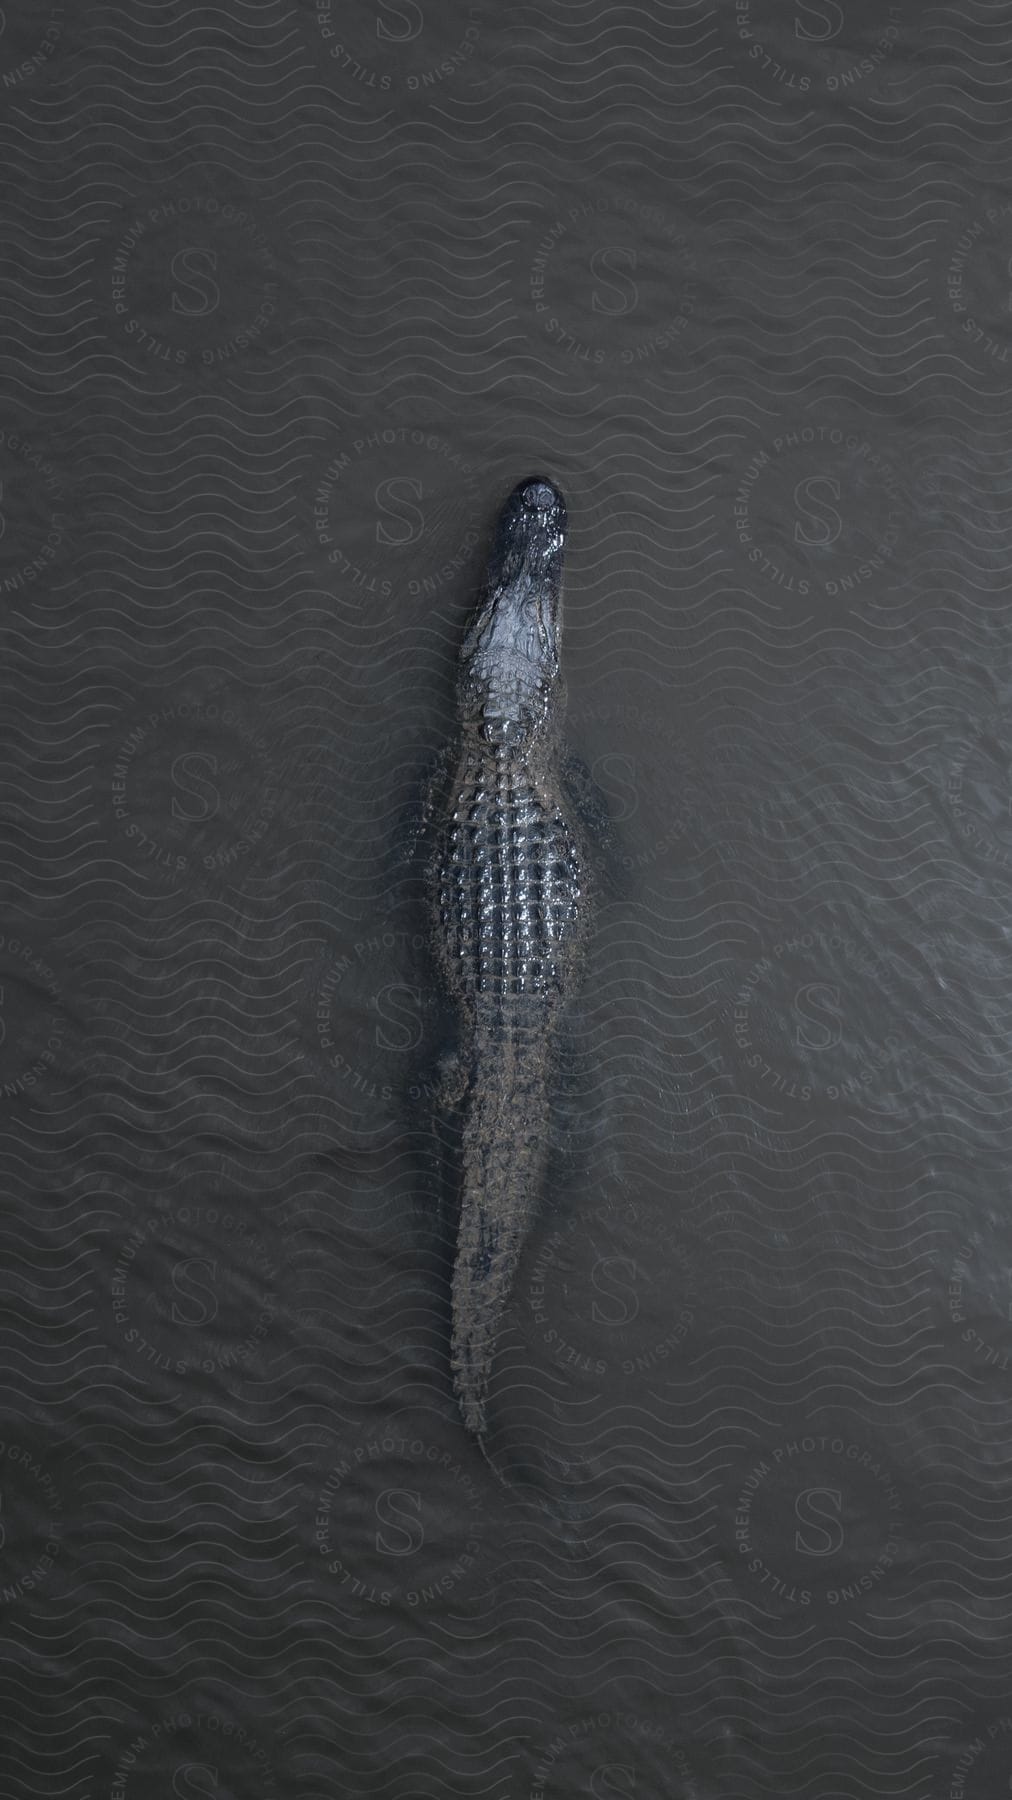 A crocodile swims in a river as seen from above